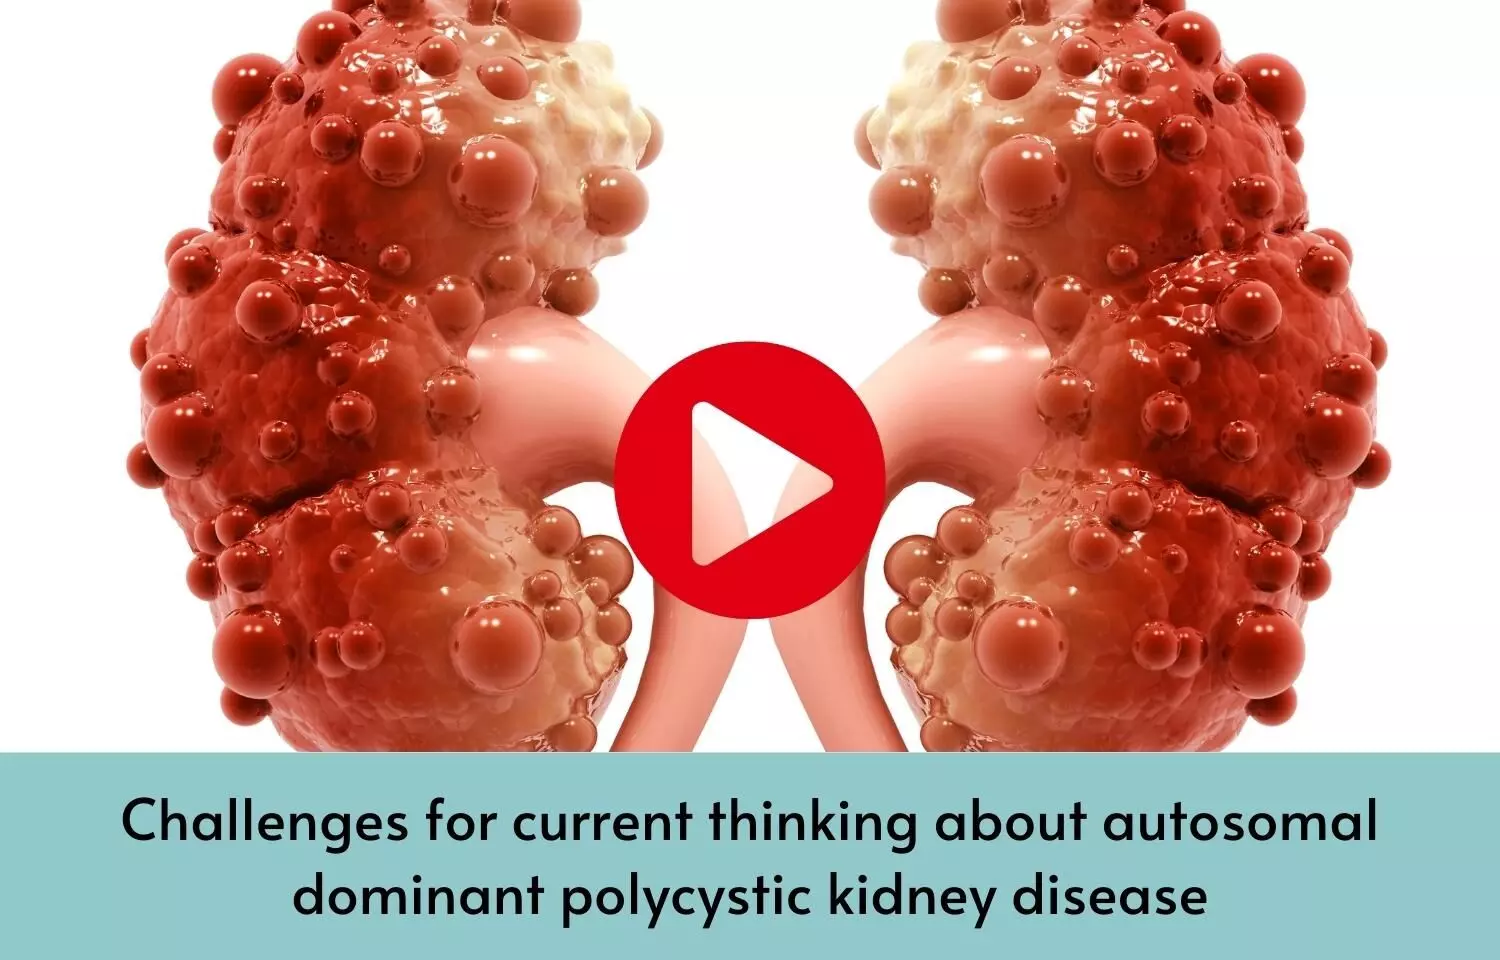 Challenges for current thinking about autosomal dominant polycystic kidney disease